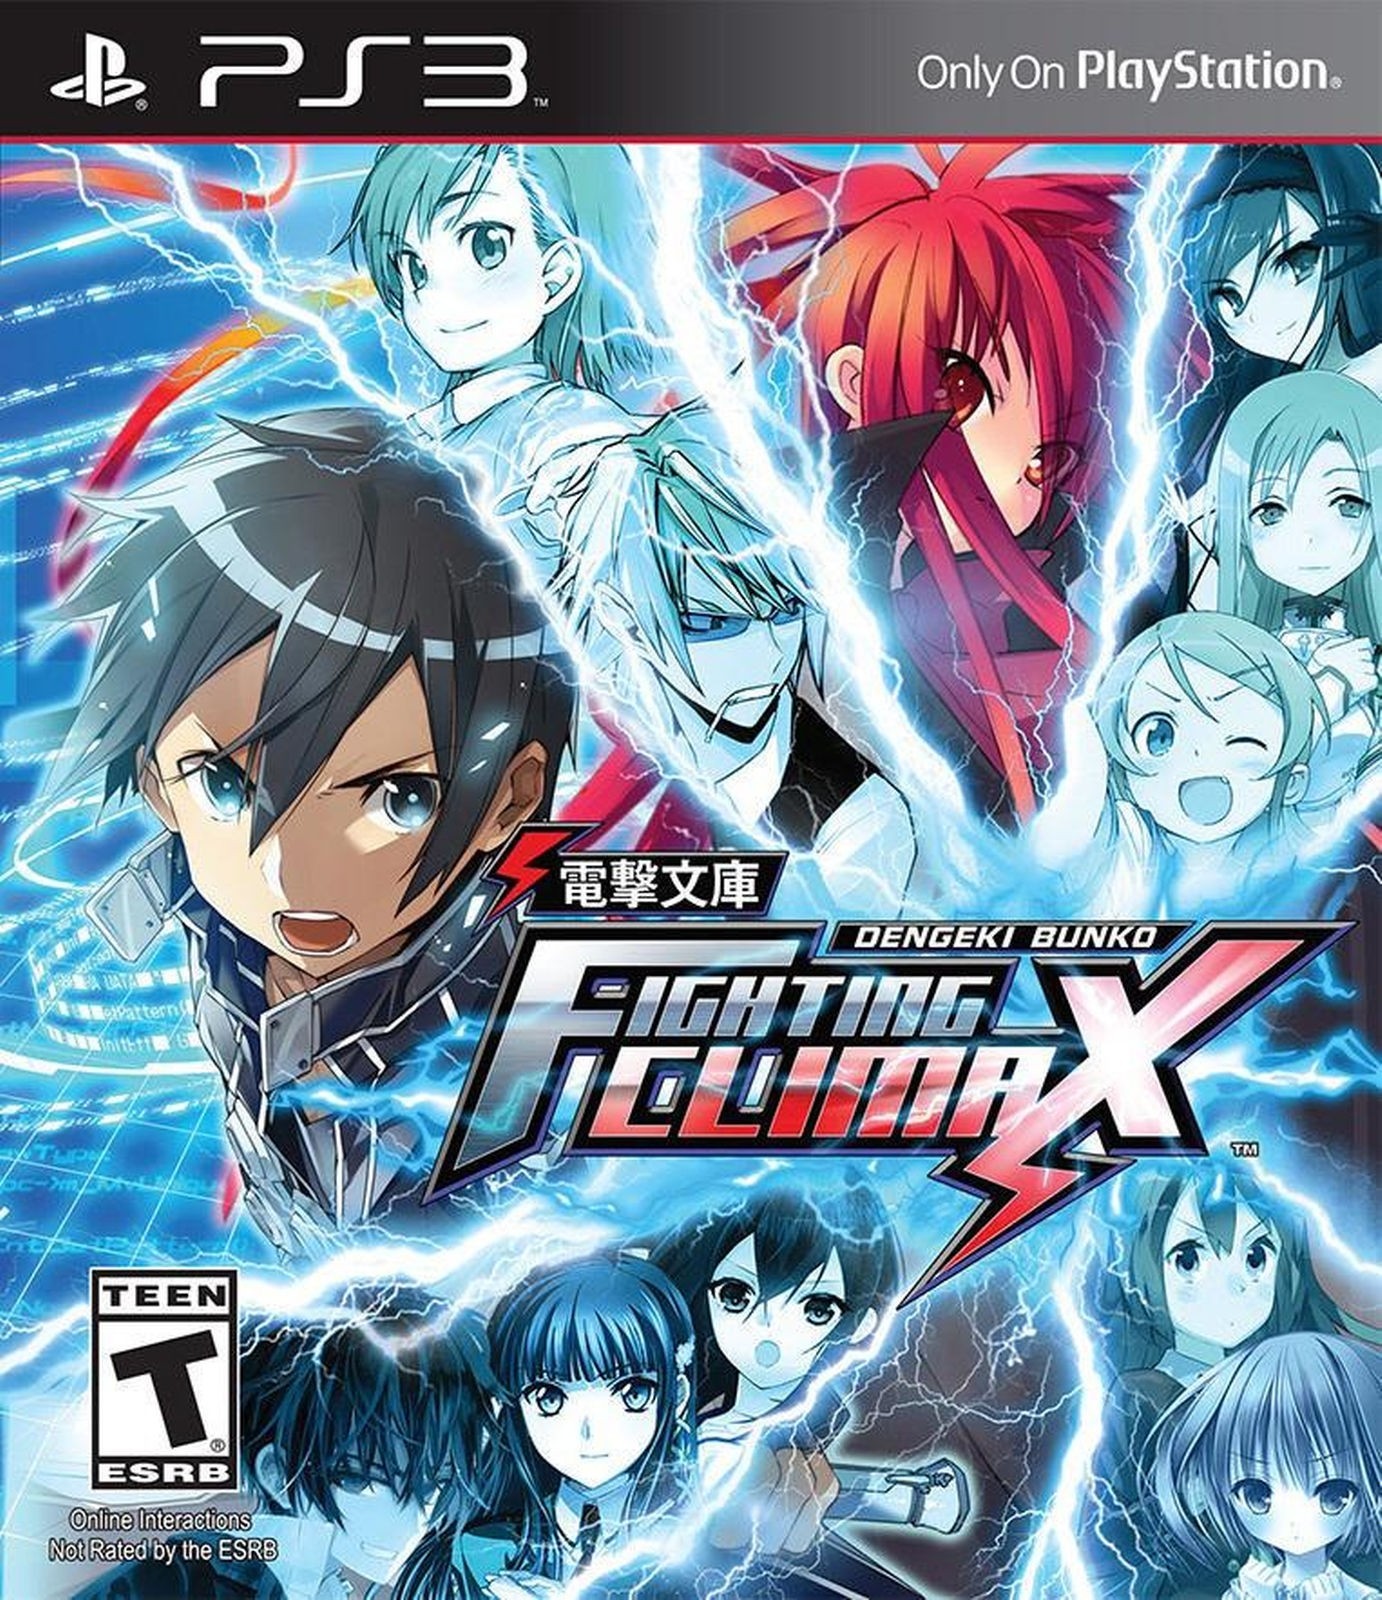 Dengeki Bunko: Fighting Climax (PS3), Ecole Software, French Bread